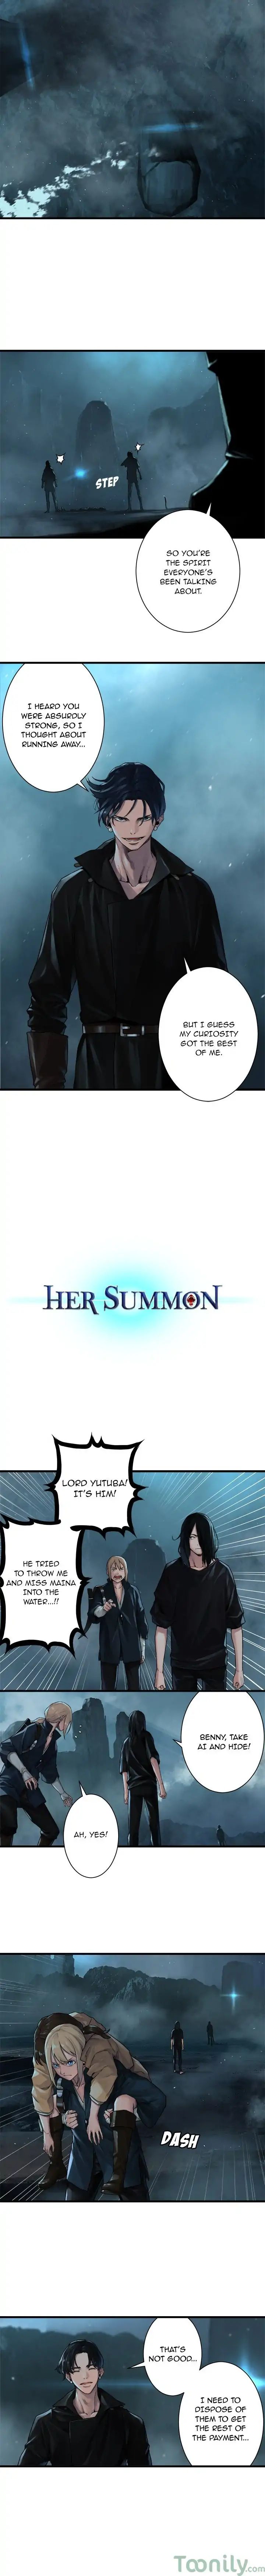 Her Summon - Page 2